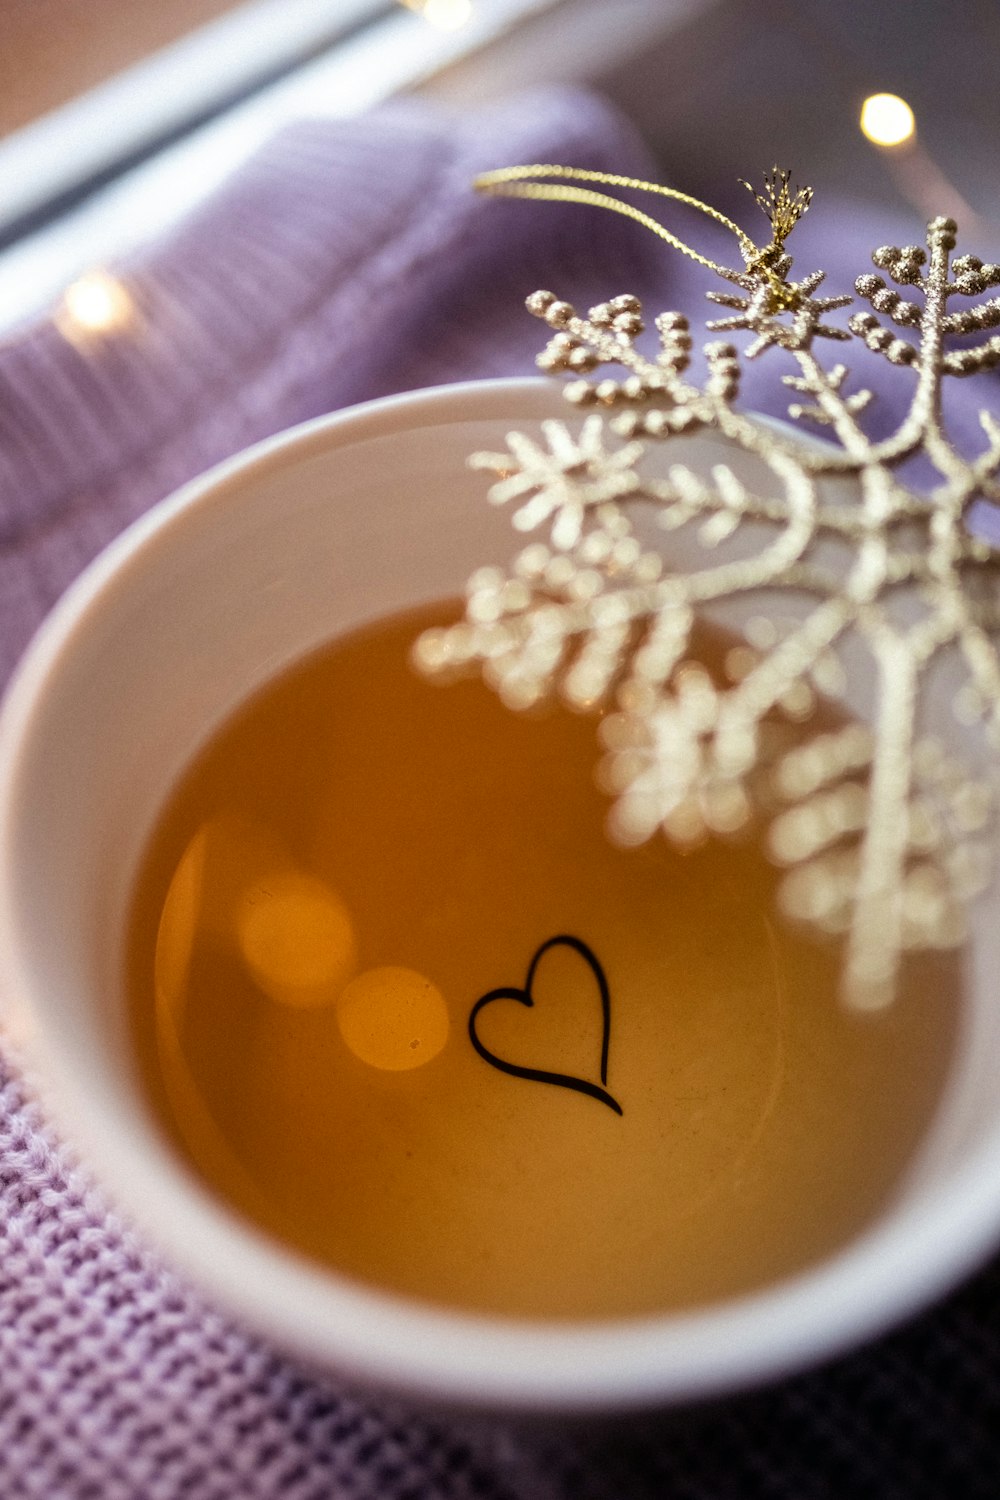 a cup of tea with a heart drawn on it